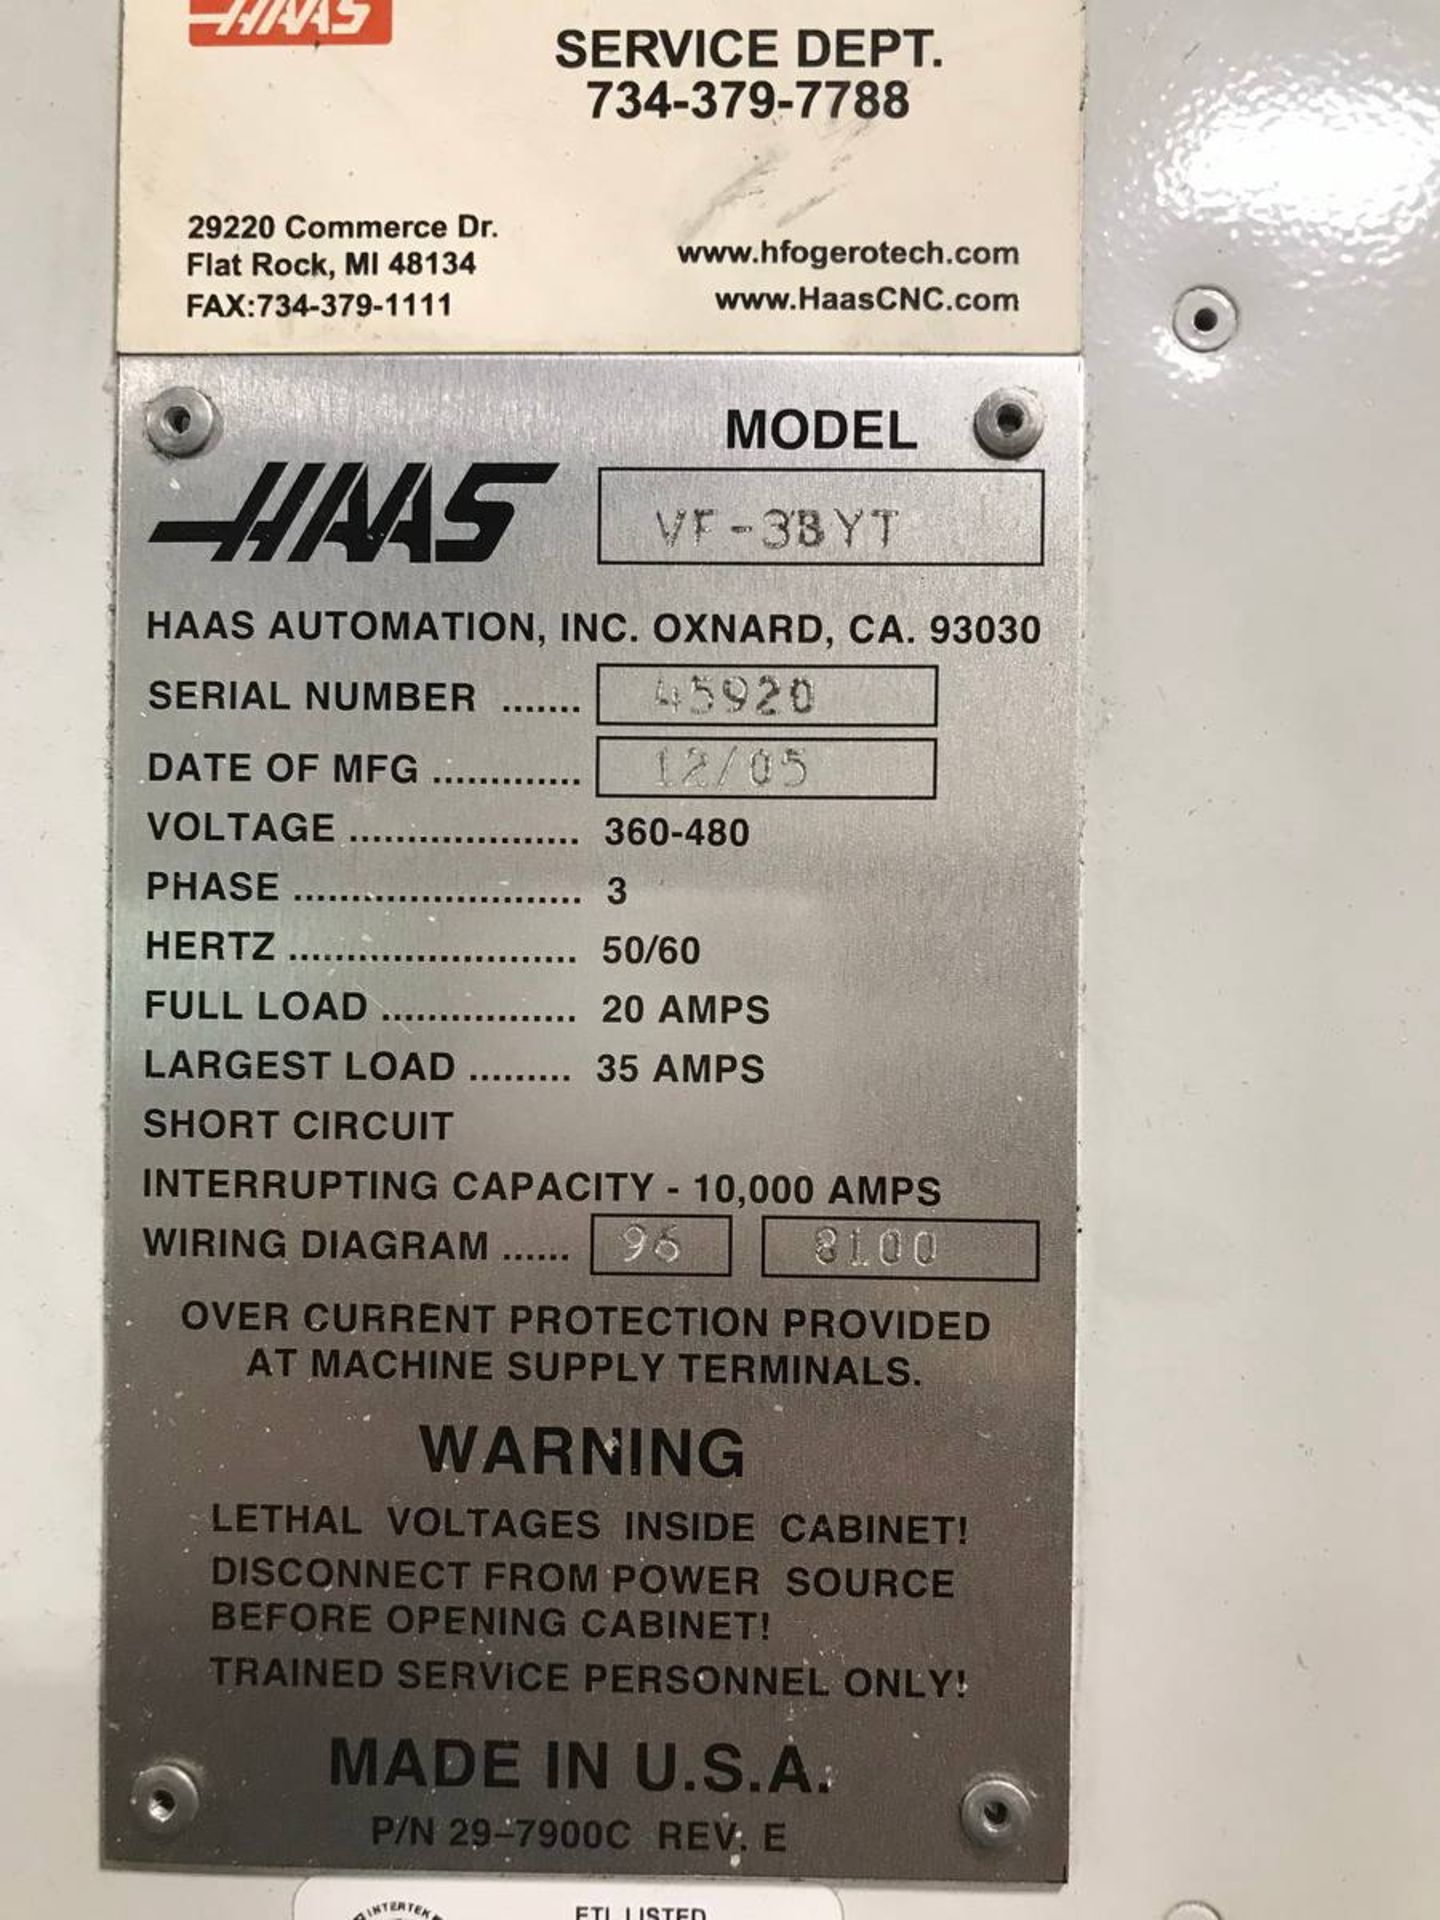 2005 HAAS VF-3BYT CNC Vertical Machine Center - Image 9 of 9